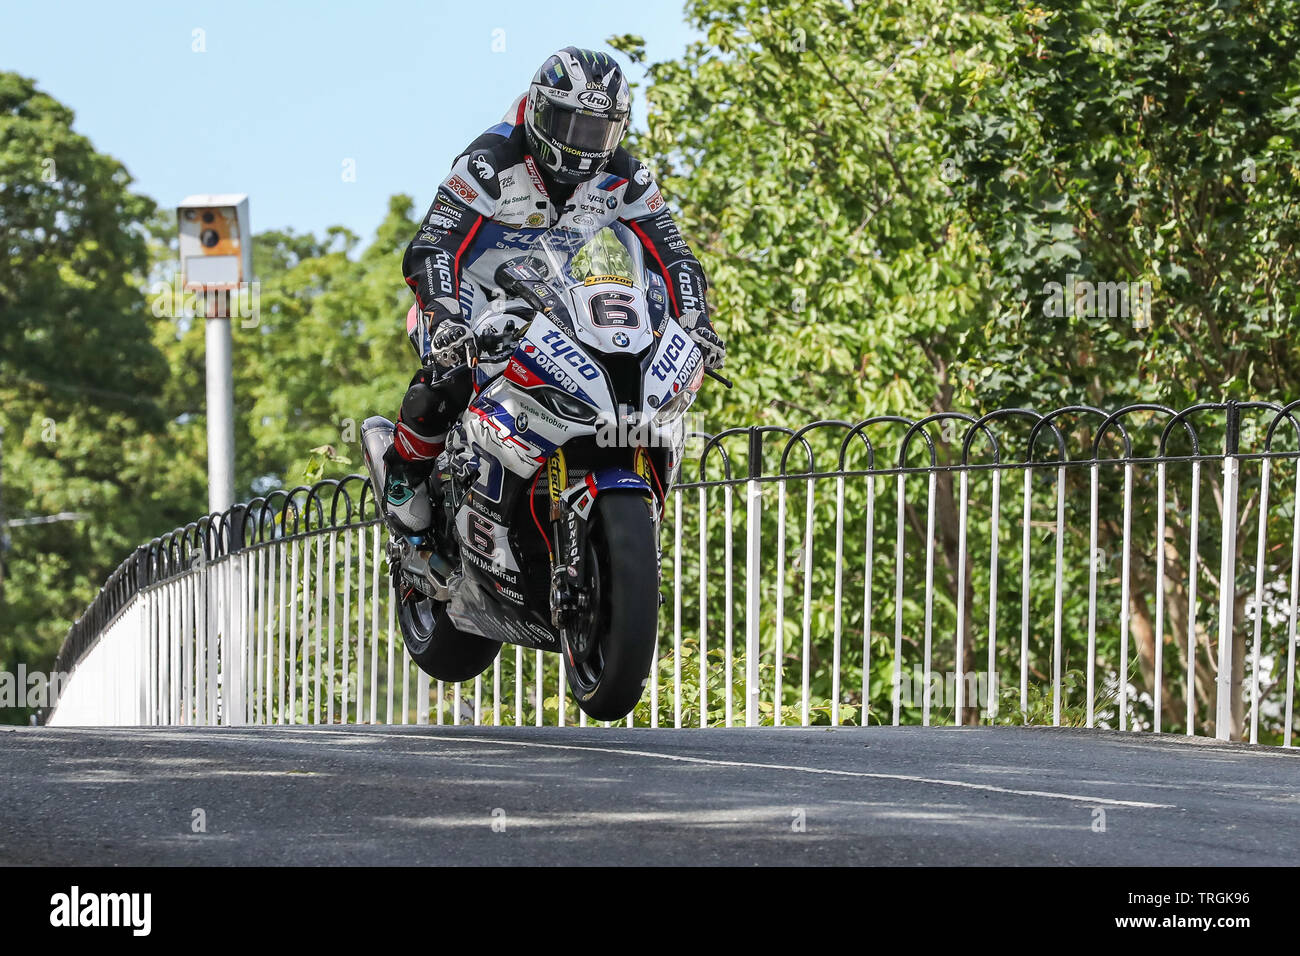 Michael Dunlop (6) - Tyco BMW in action in the RST Superbike class Race at  the 2019 Isle of Man TT (Tourist Trophy) Races, Fuelled by Monster Energy D  Stock Photo - Alamy